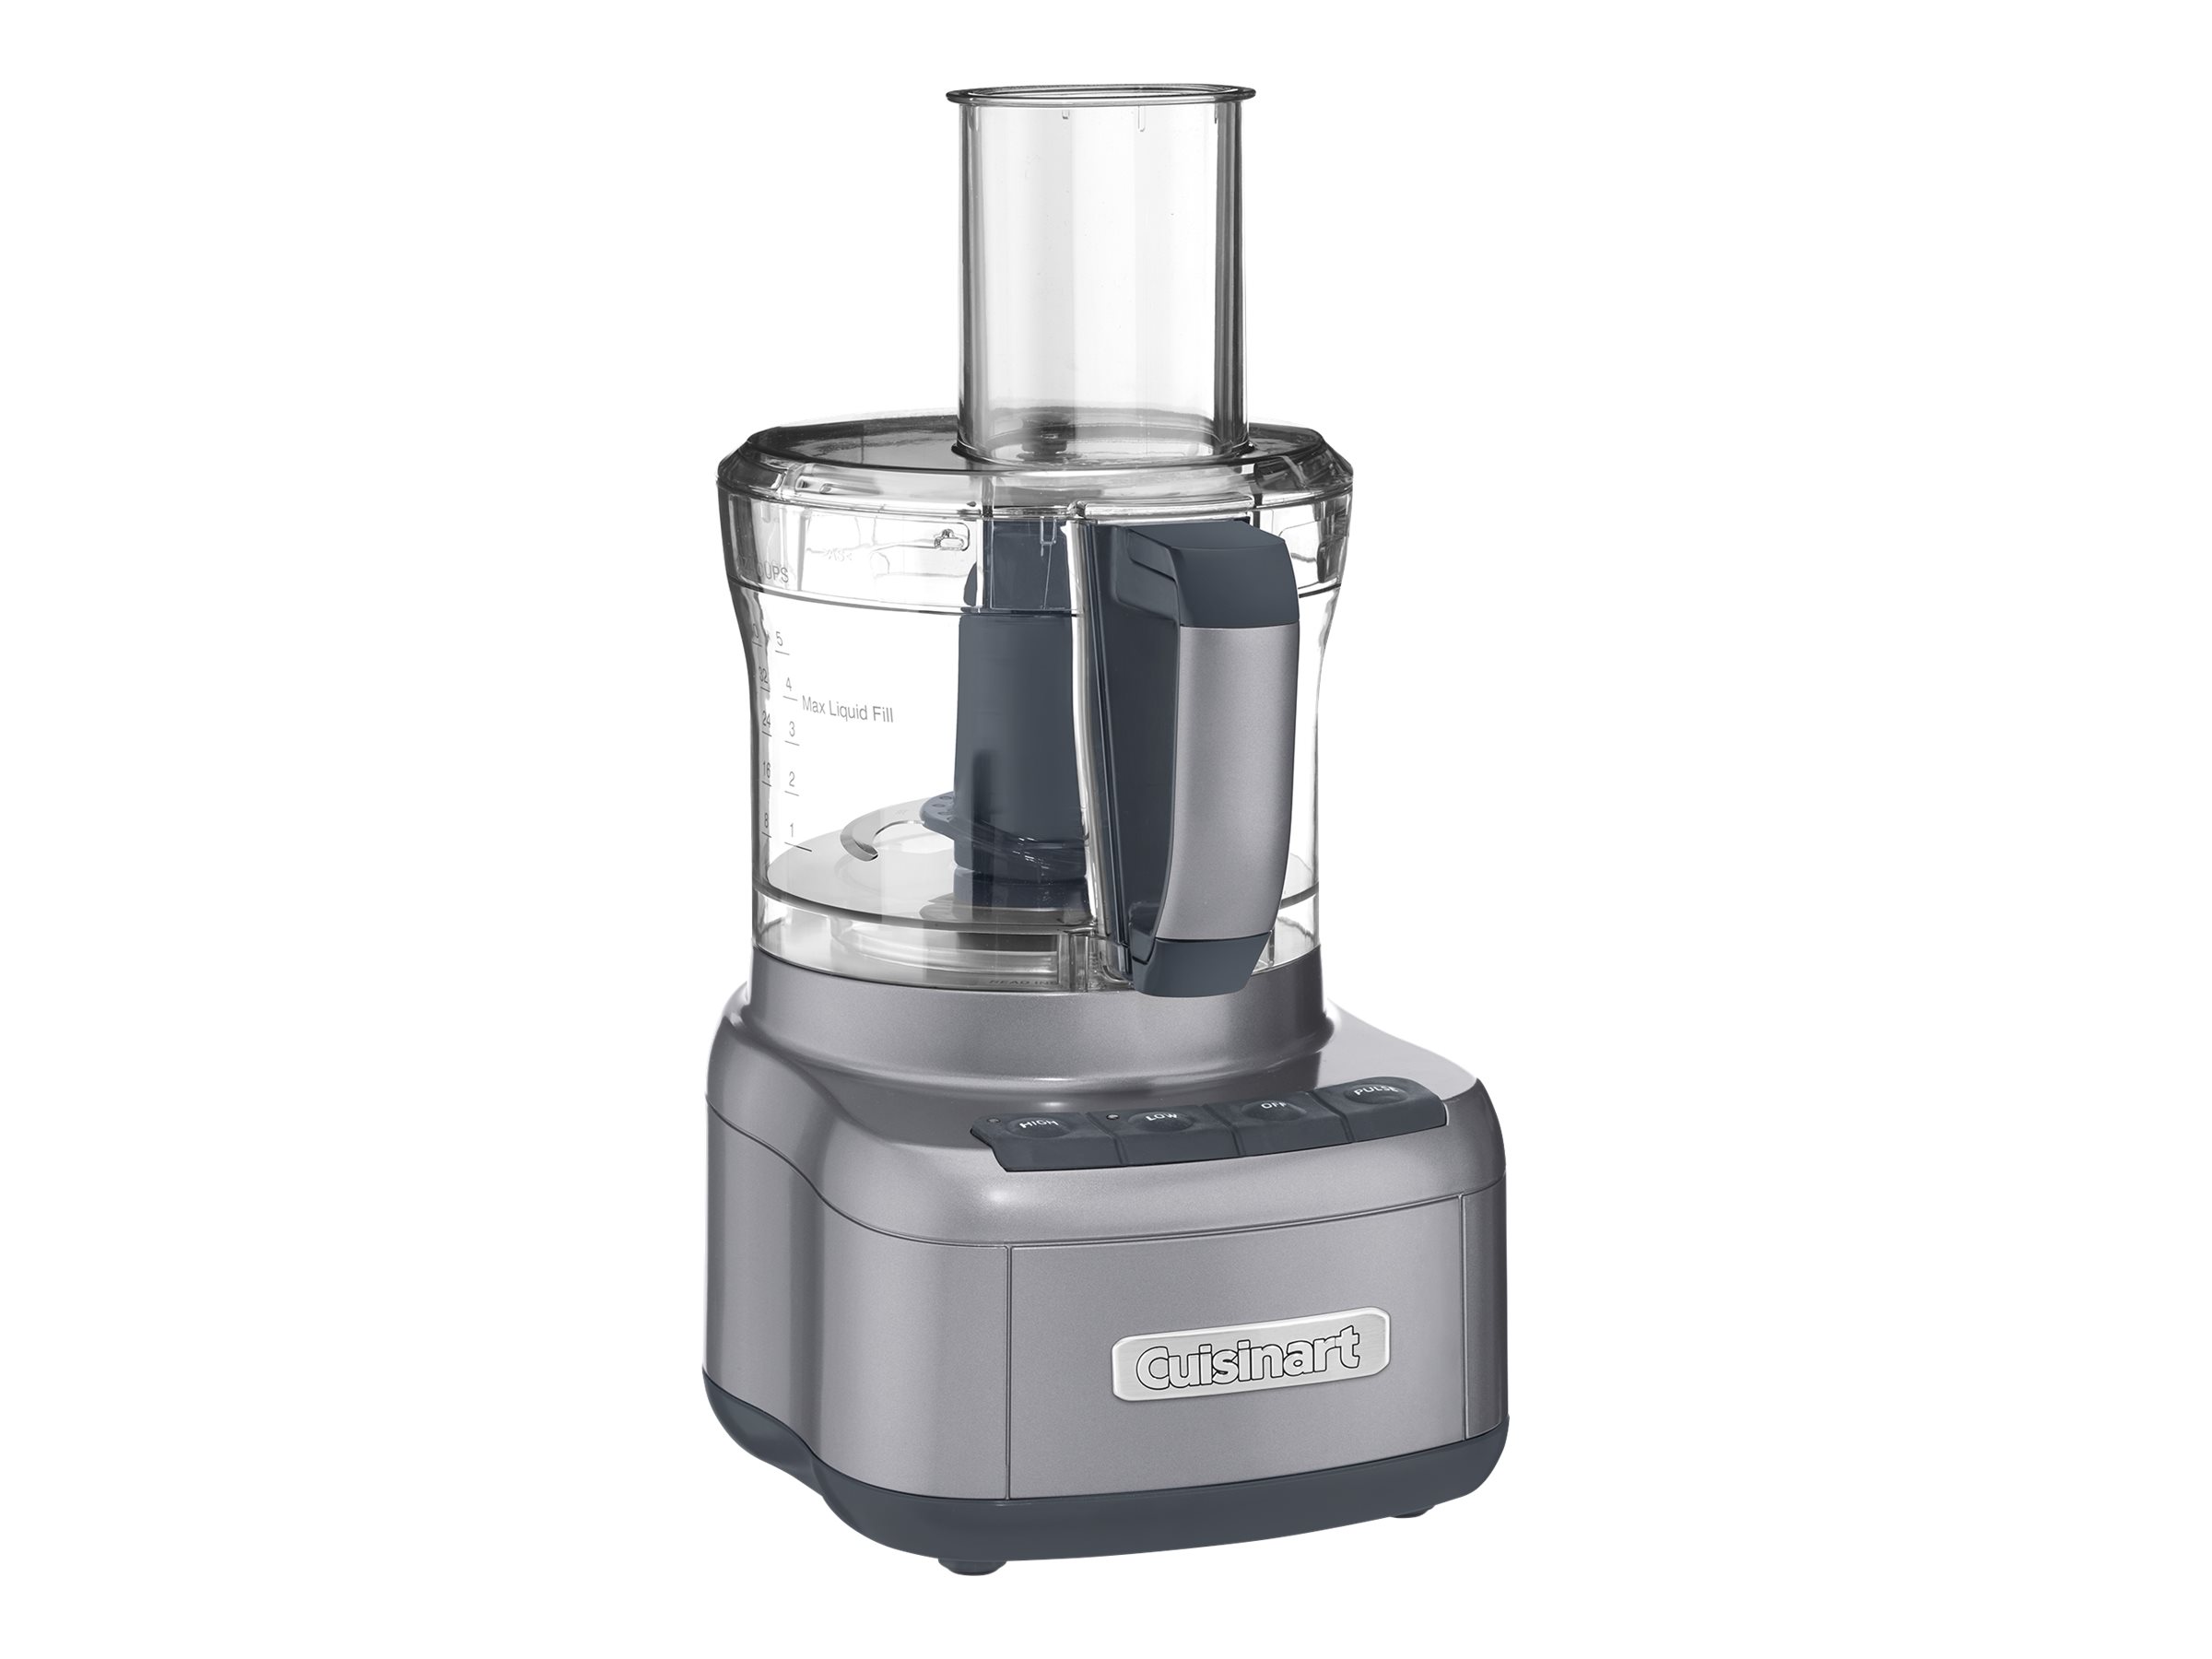 Cuisinart FP8GMP1 Elemental 8-Cup Food Processor - image 4 of 4